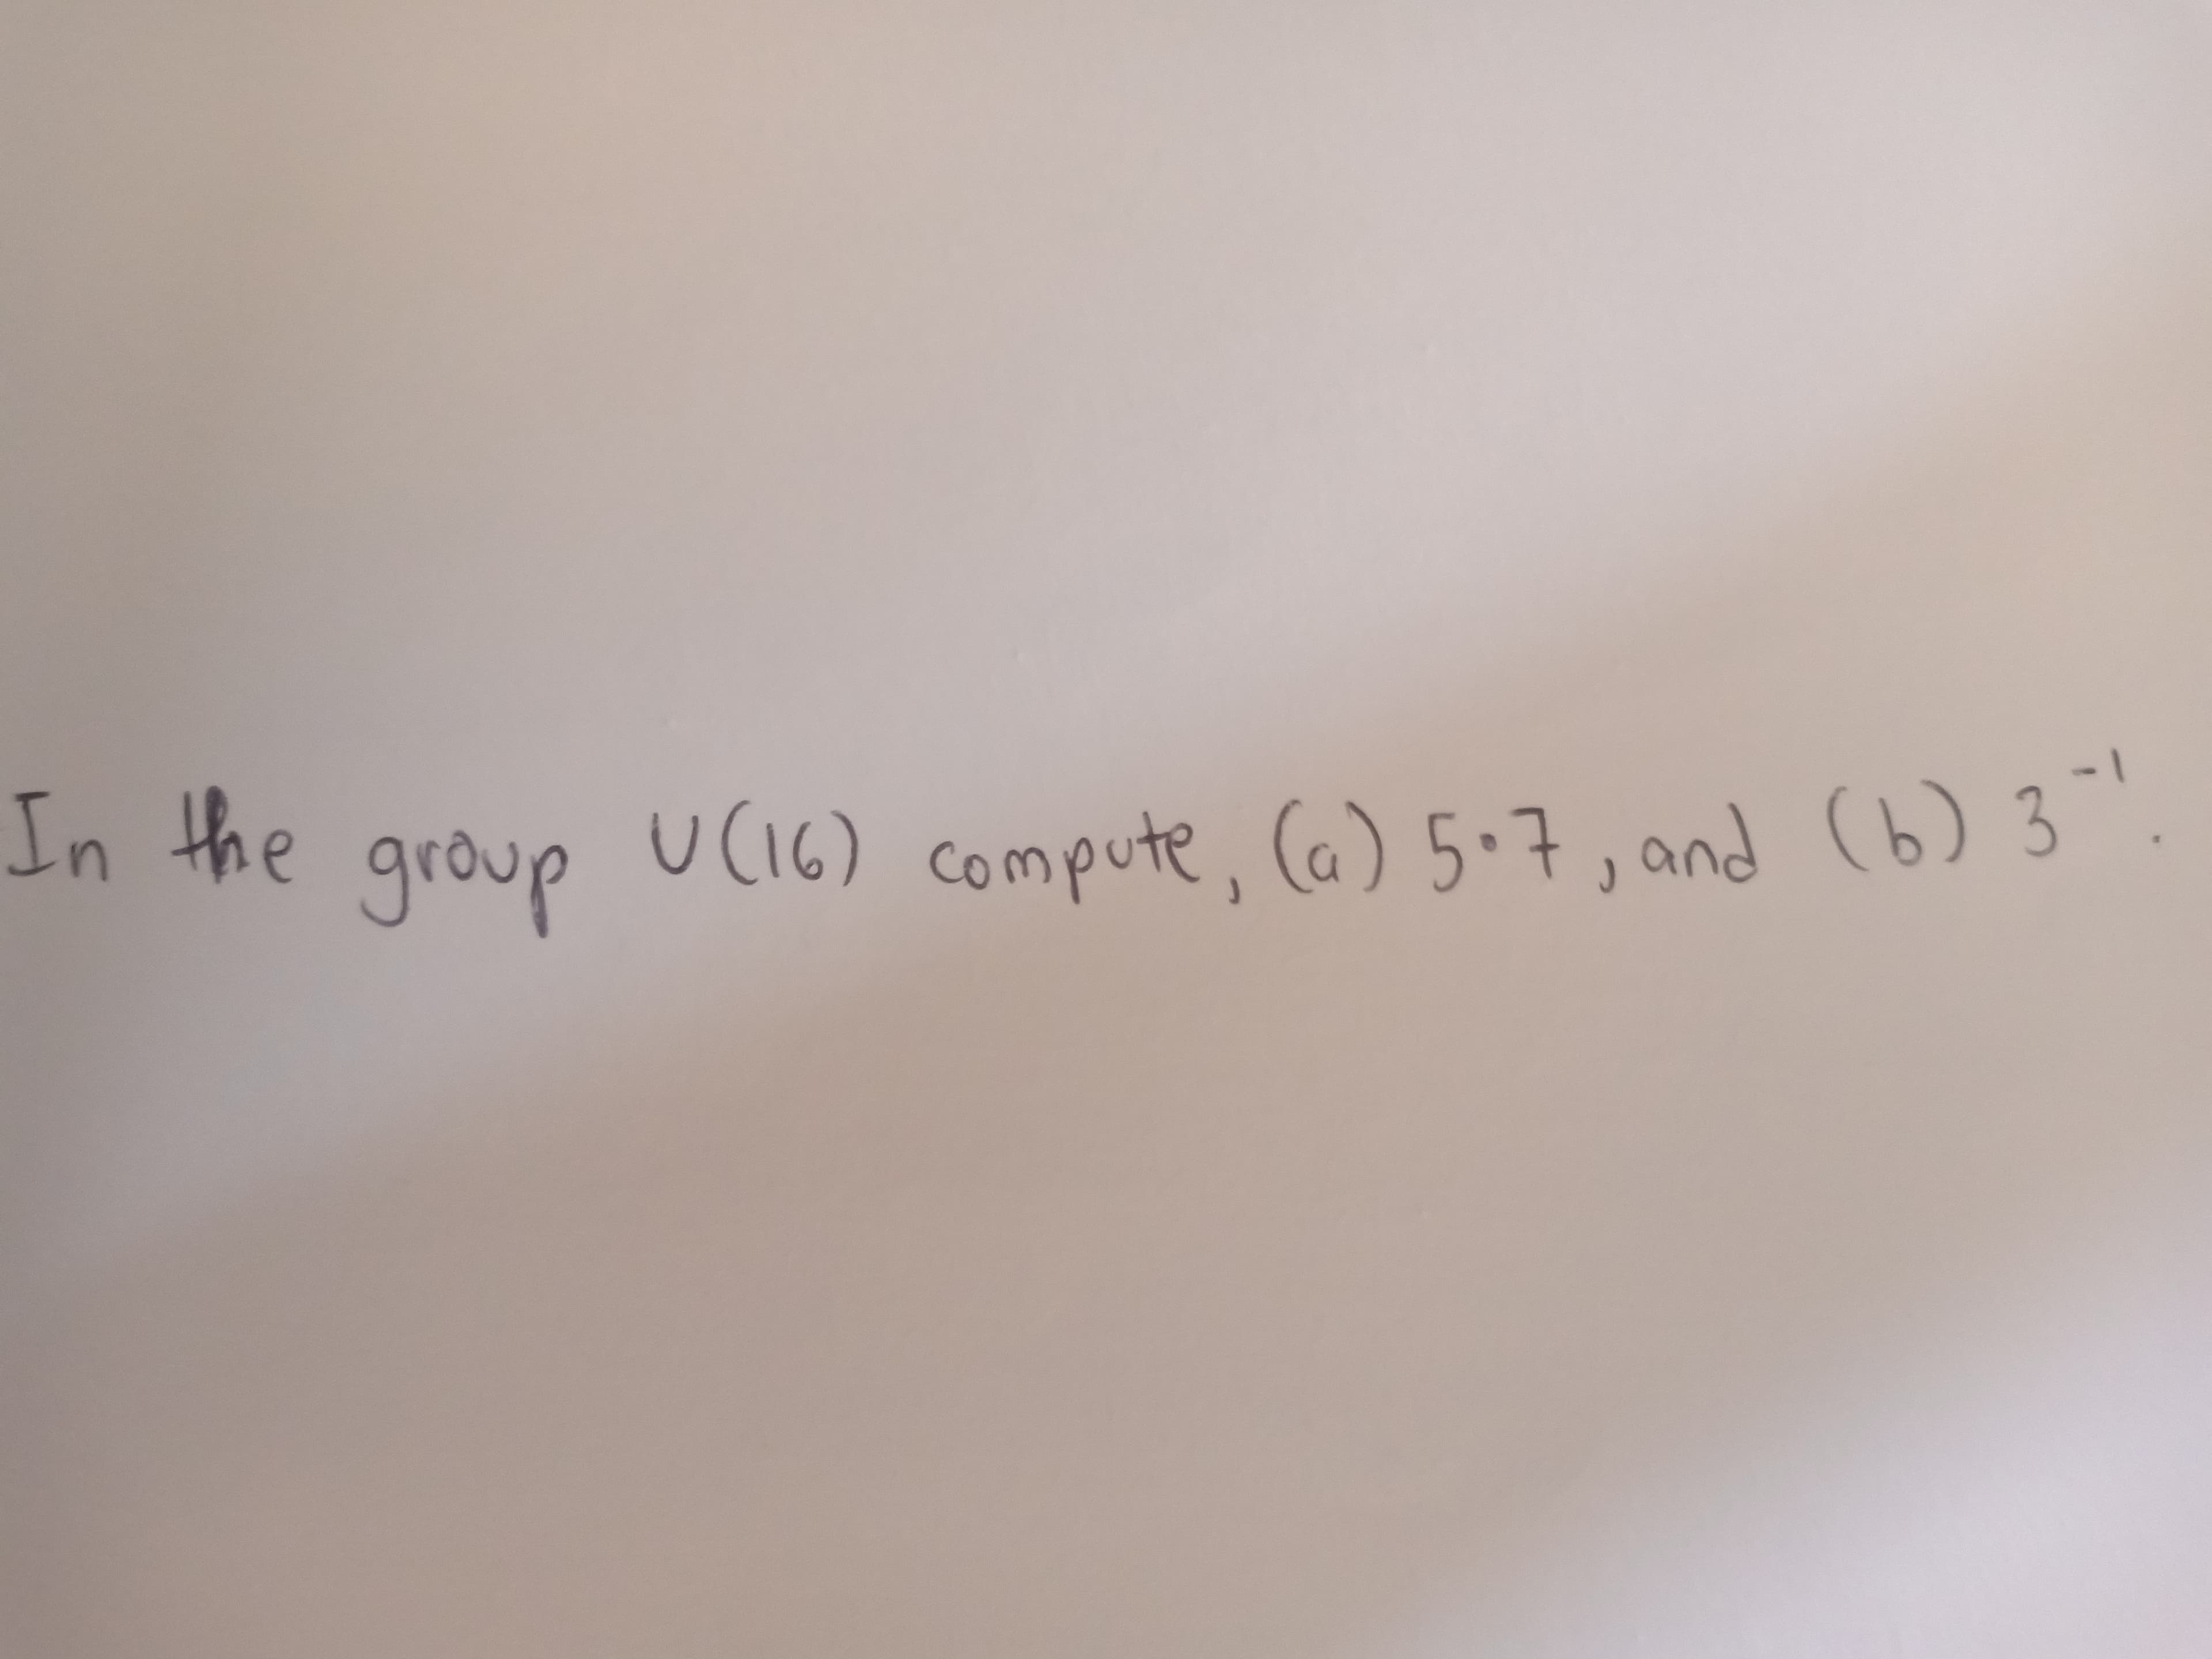 In the group U (I6)
compute, (a) 5.7, and (b) 3
